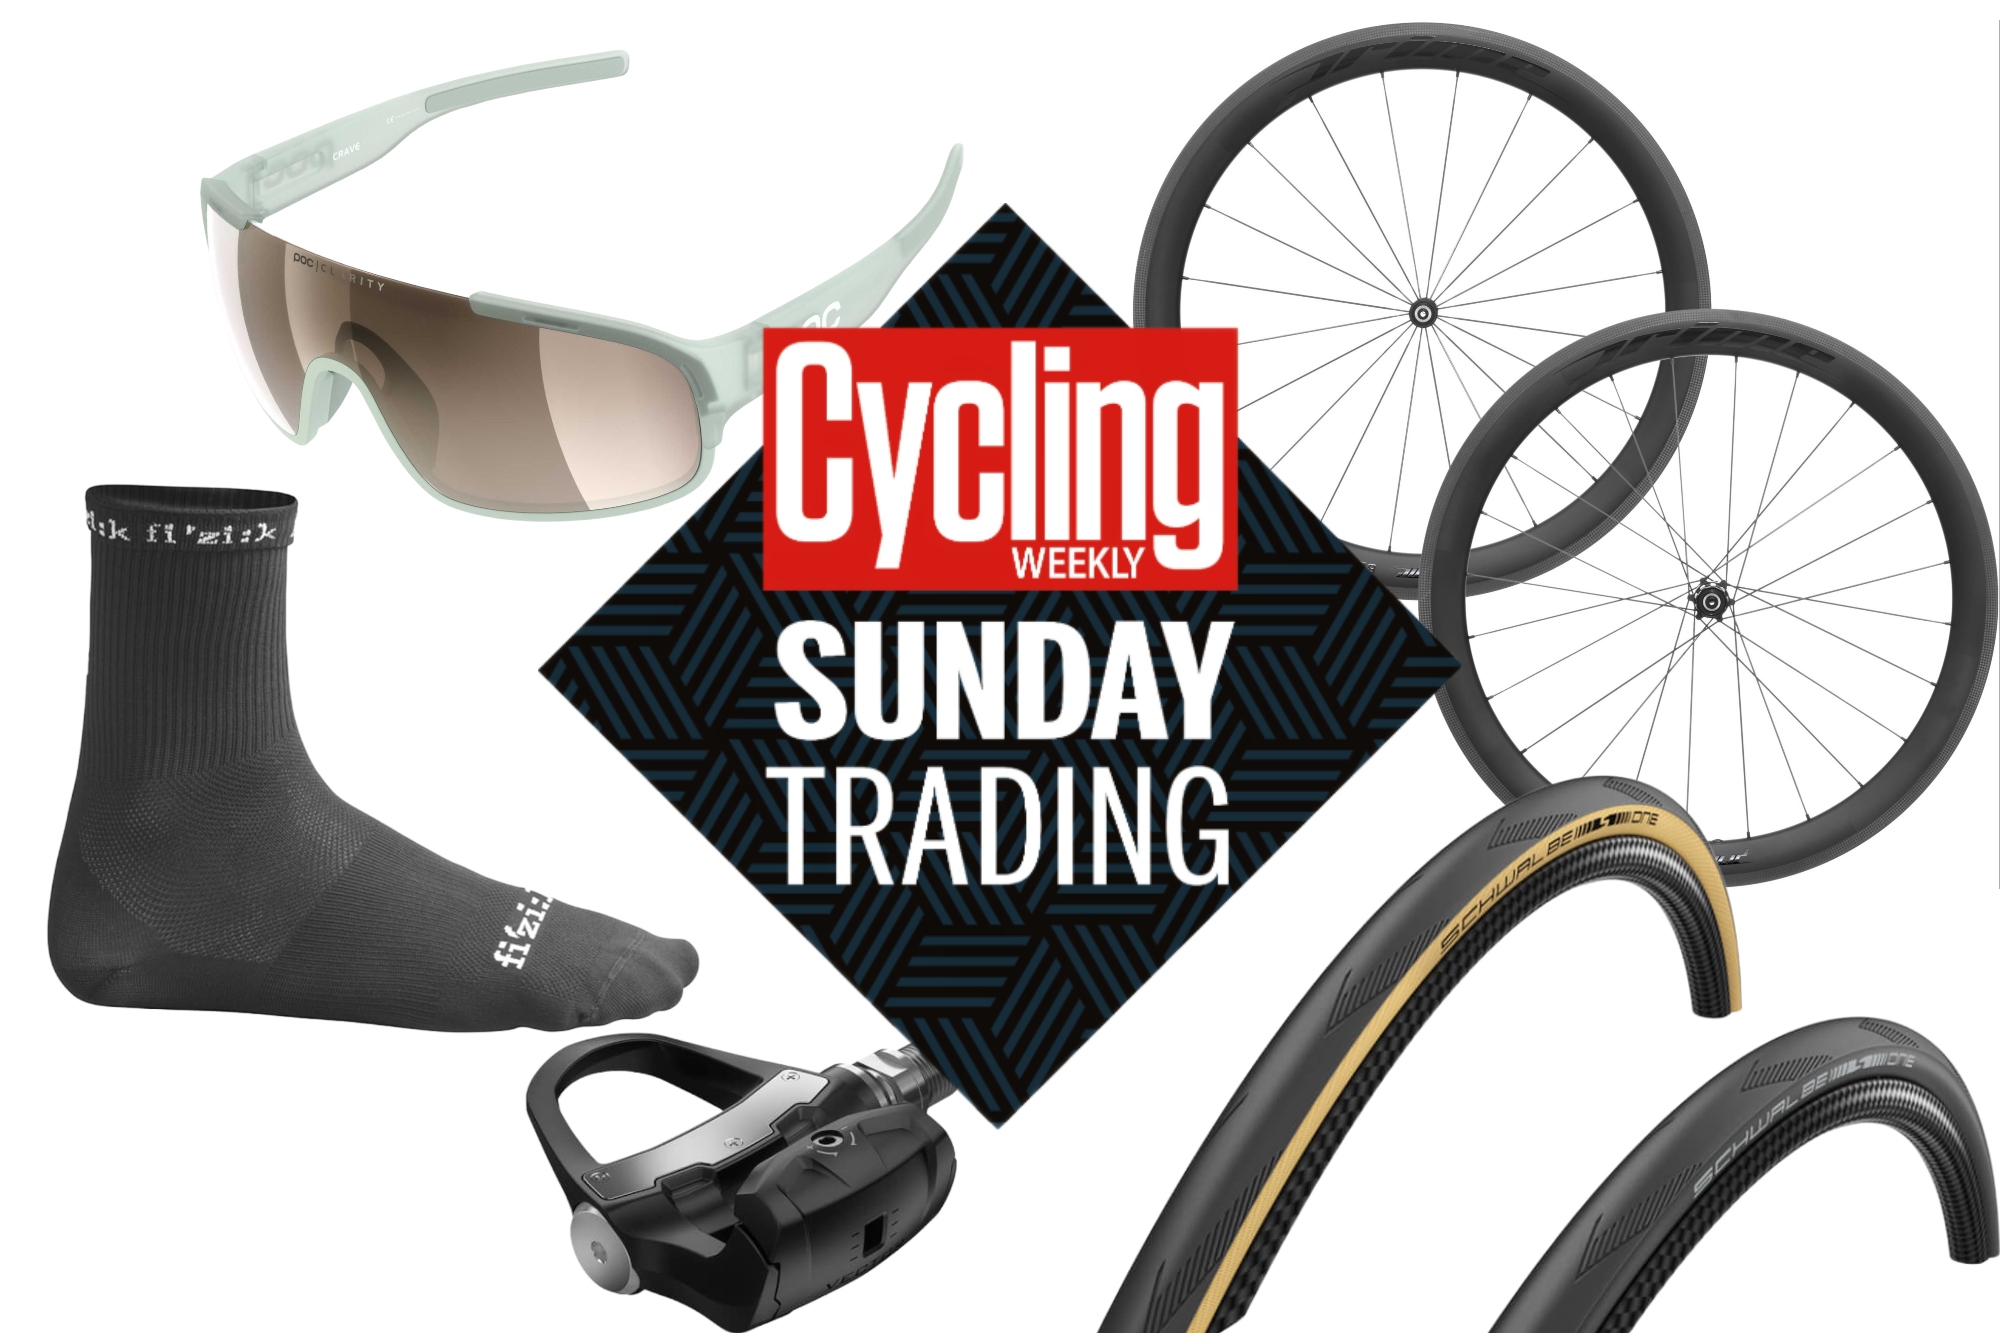 Sunday Trading Schwalbe Pro One Tires Poc Sunglasses Prime Carbon Wheels And Much More Cycling Weekly - castle halsey roblox id